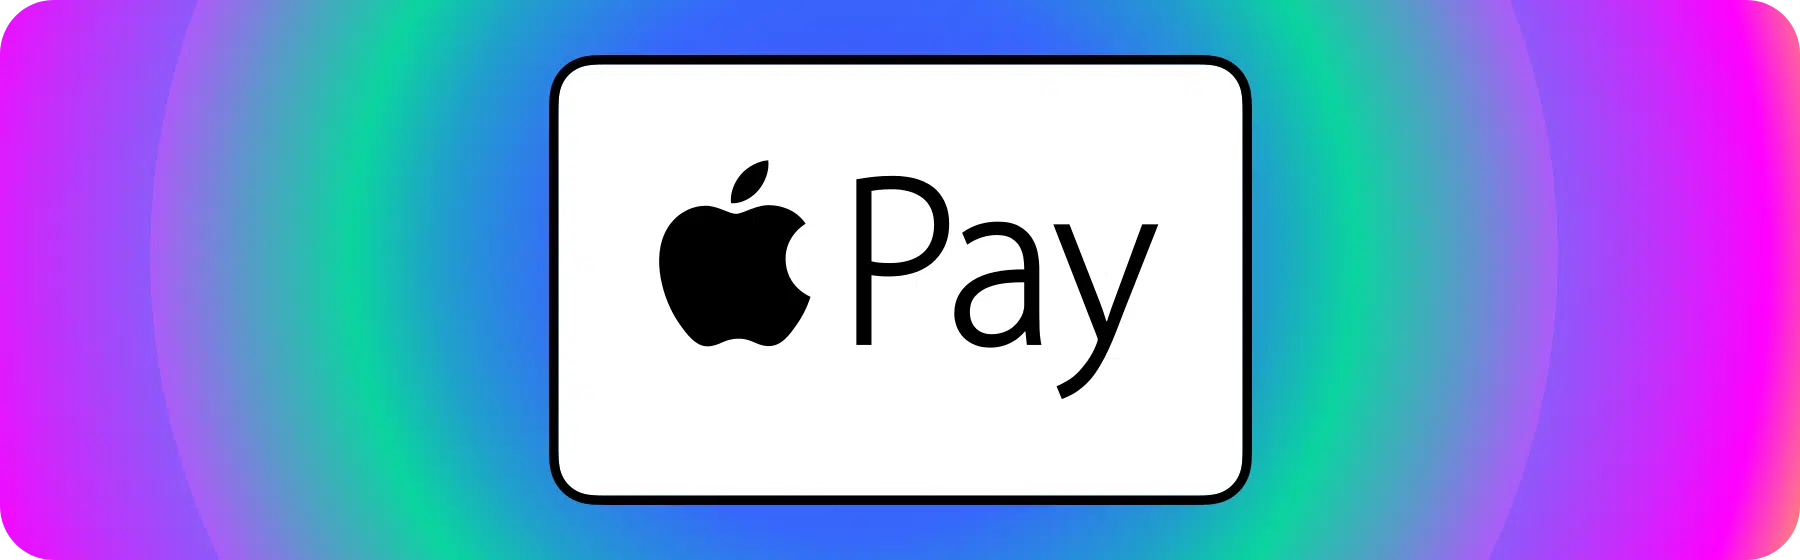 picture with apple pay logo 